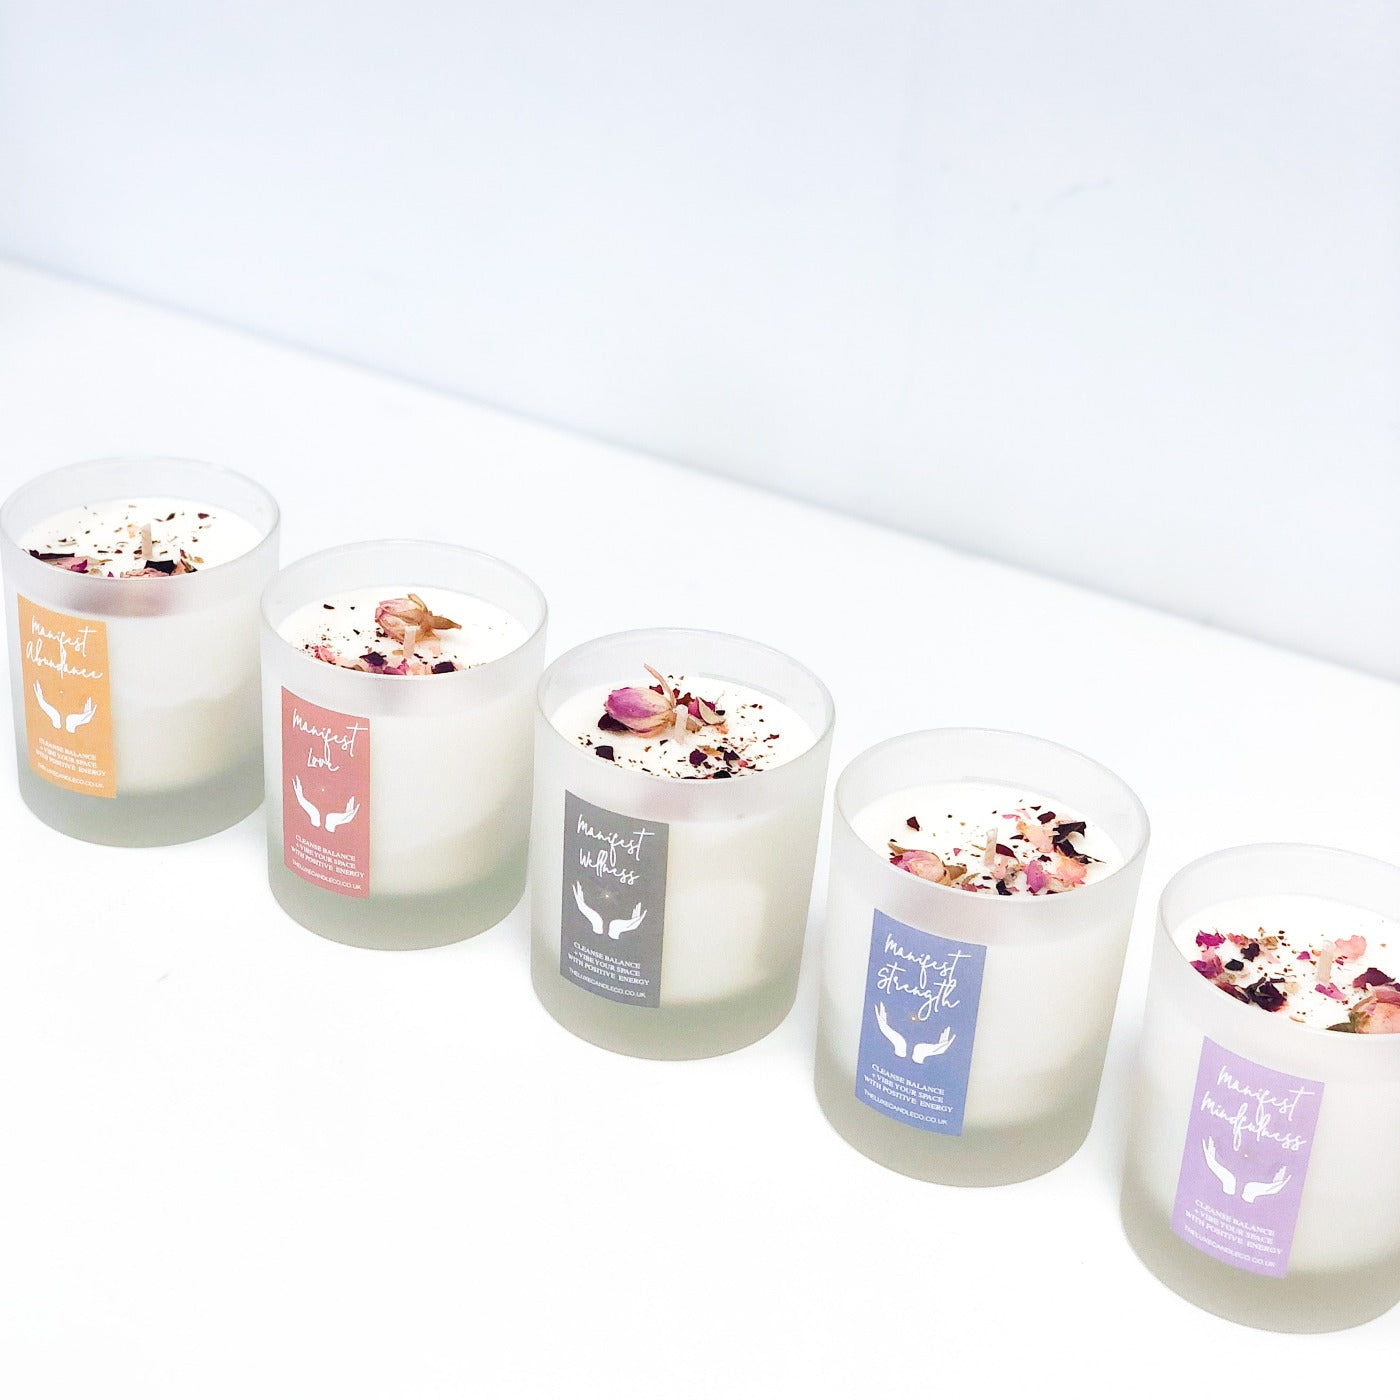 Manifest Wellness Candle | The Luxe Candle Co